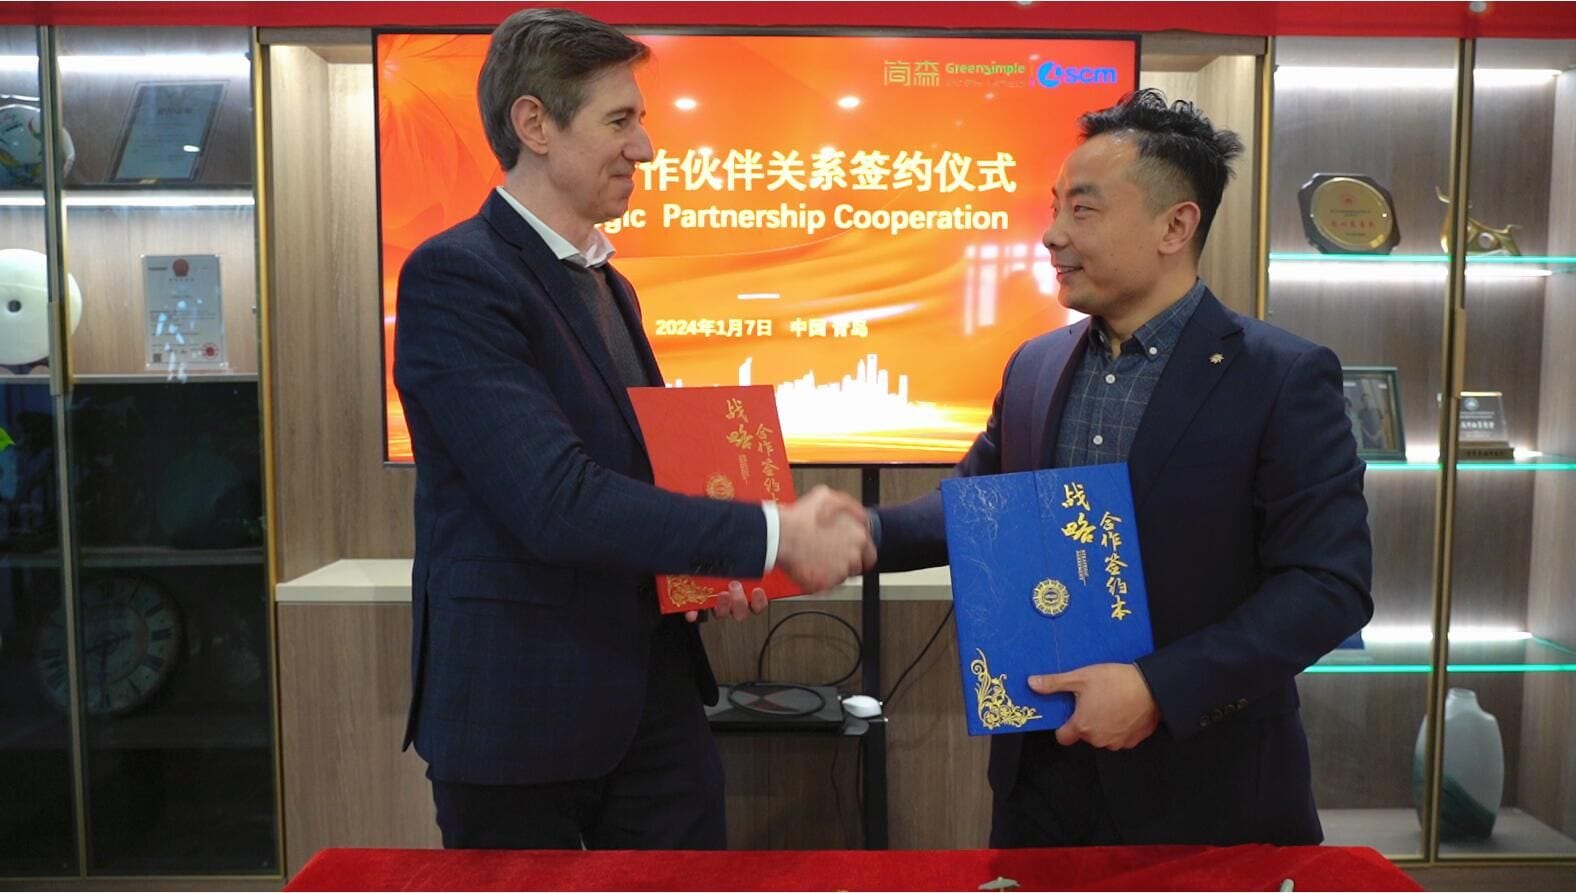 Successful partnership for SCM China